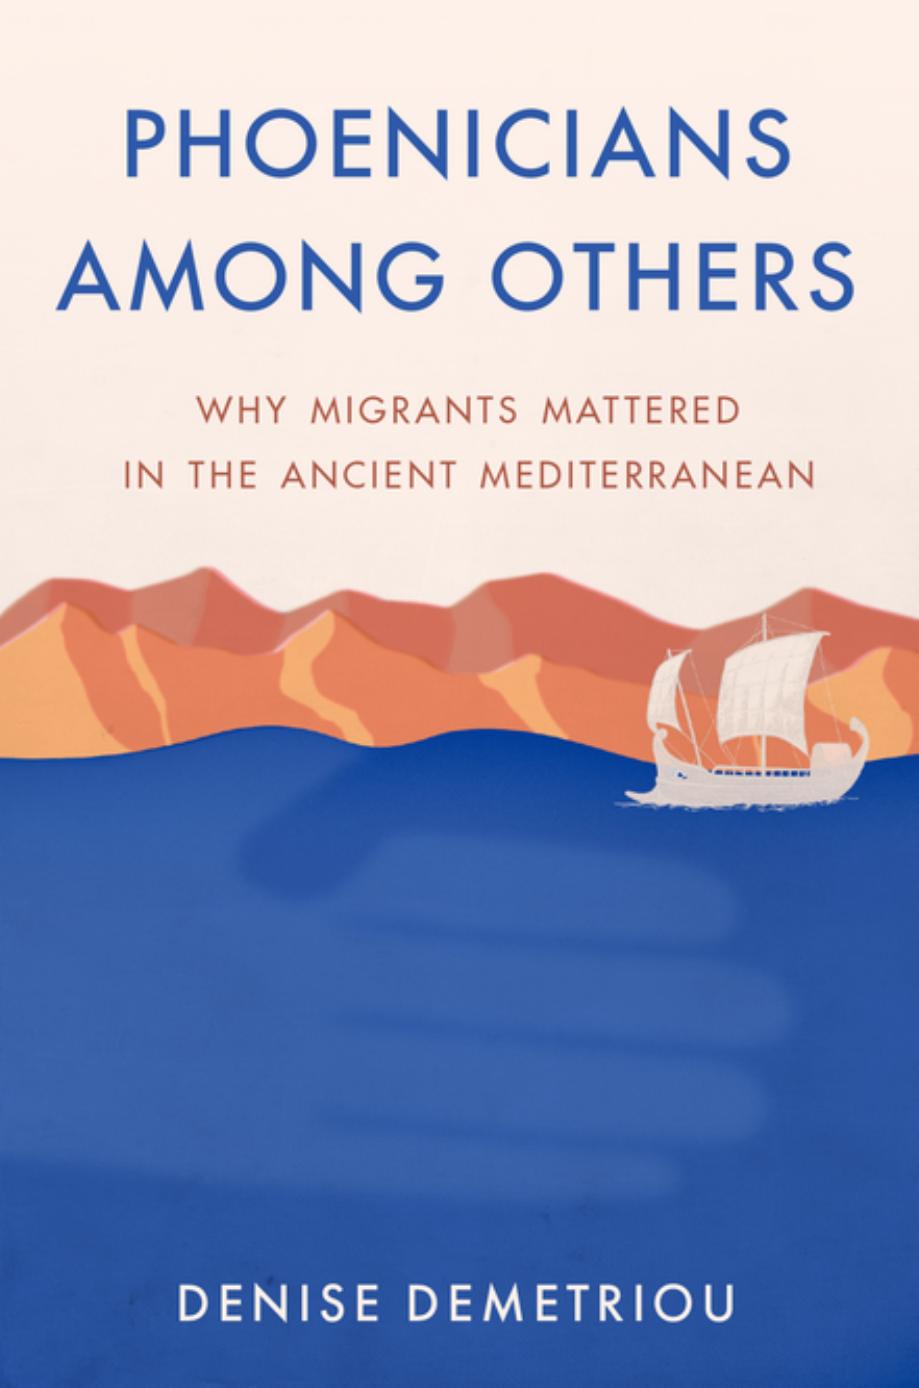 Phoenicians among Others: Why Migrants Mattered in the Ancient Mediterranean by Denise Demetriou